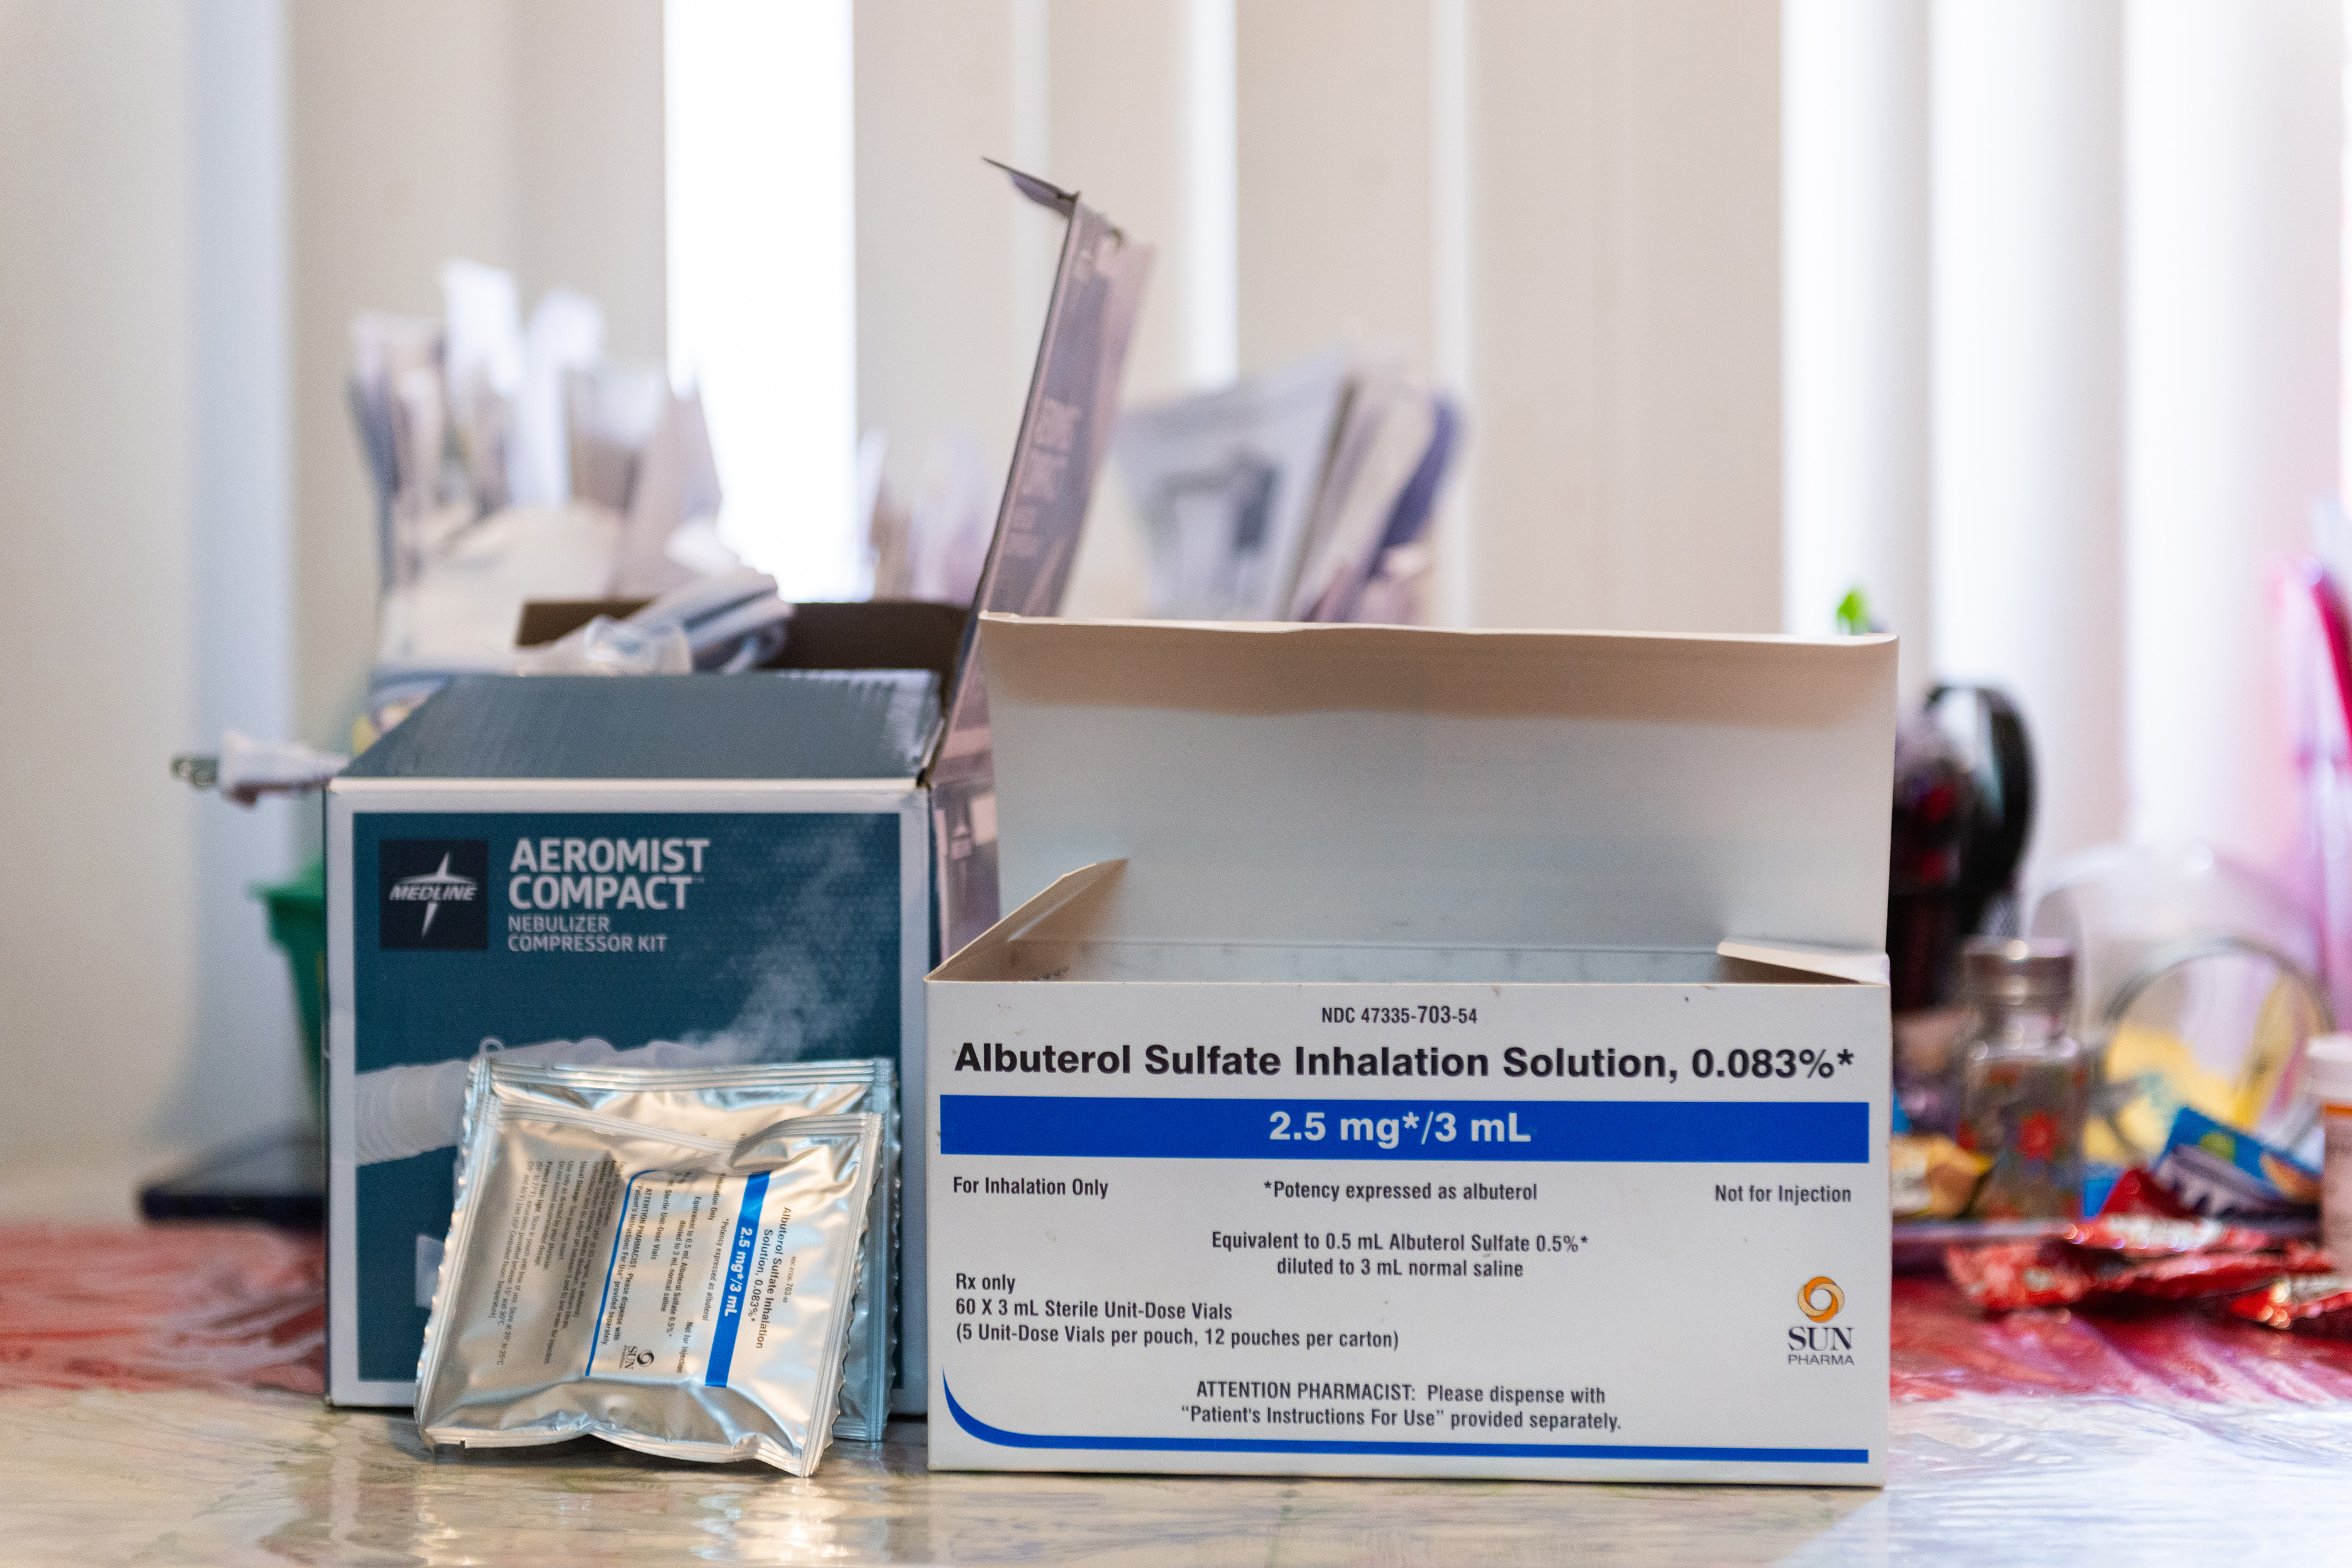 The photograph shows a box of medication Lucas takes for his lung cancer. It is a white box with blue lettering that reads, "Albuterol Sulfate Inhalation Solution." A nebulizer compressor kit is also visible.